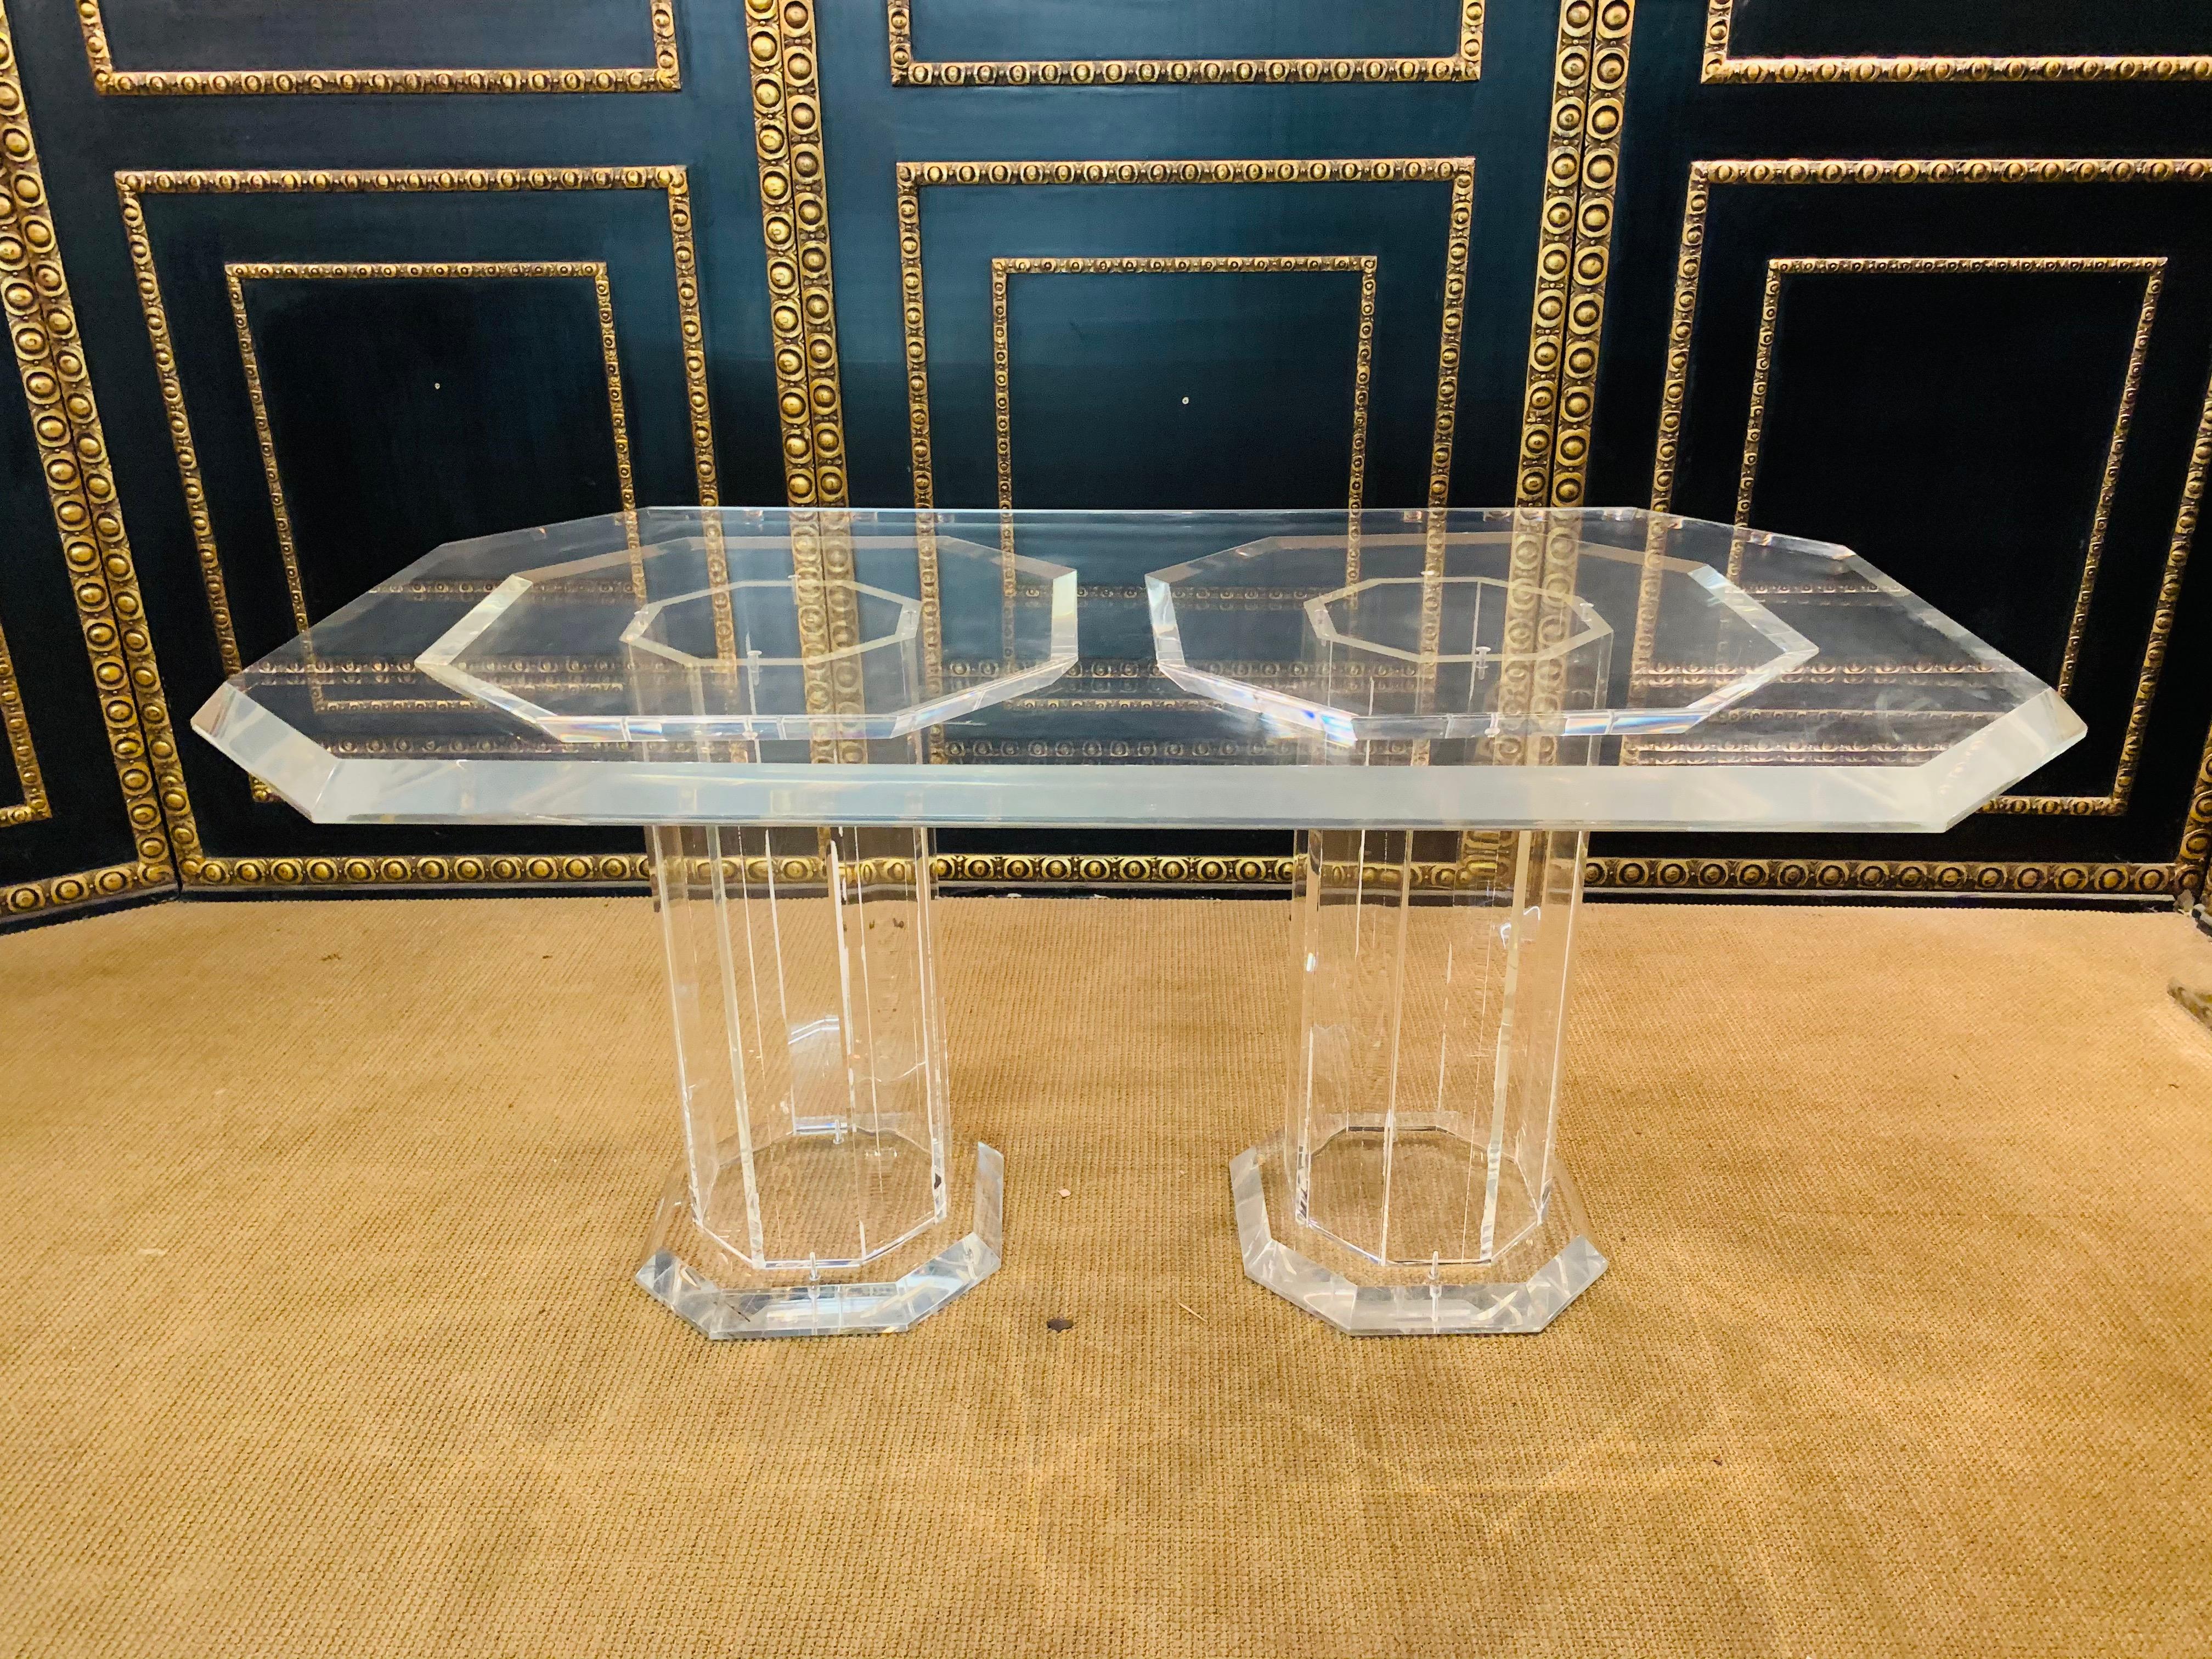 Very high quality, elegant, massive luxury dining table with 2 columns.
It is an absolute highlight and something very special.
The plate is made of solid acrylic and weighs over 70 kilograms.
It is an absolute highlight and something very